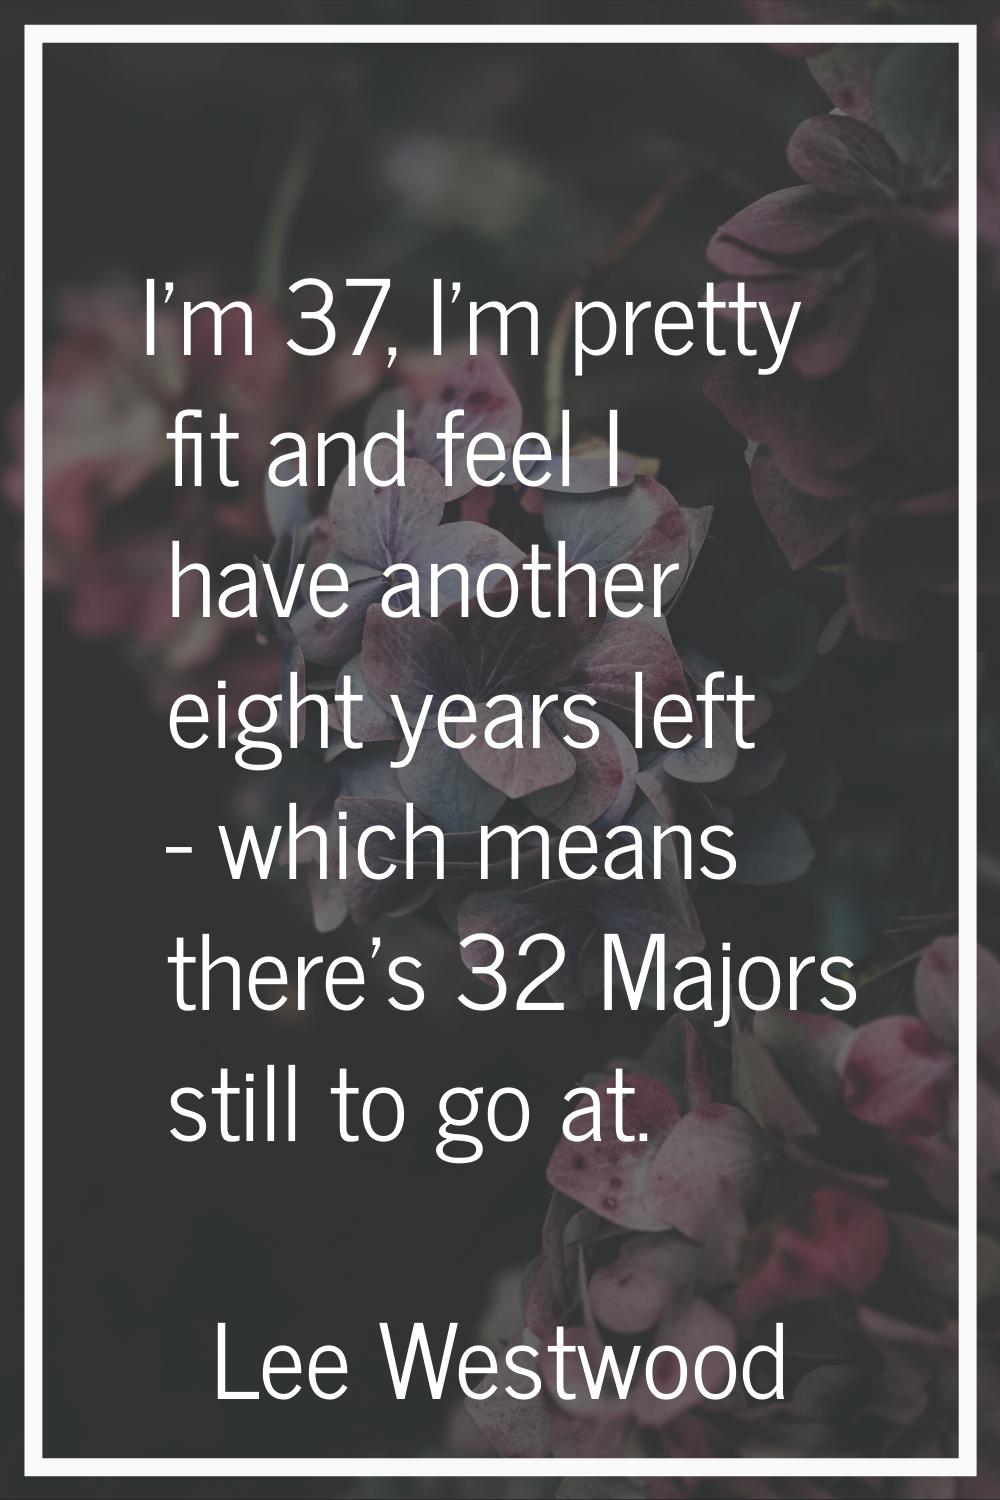 I'm 37, I'm pretty fit and feel I have another eight years left - which means there's 32 Majors sti